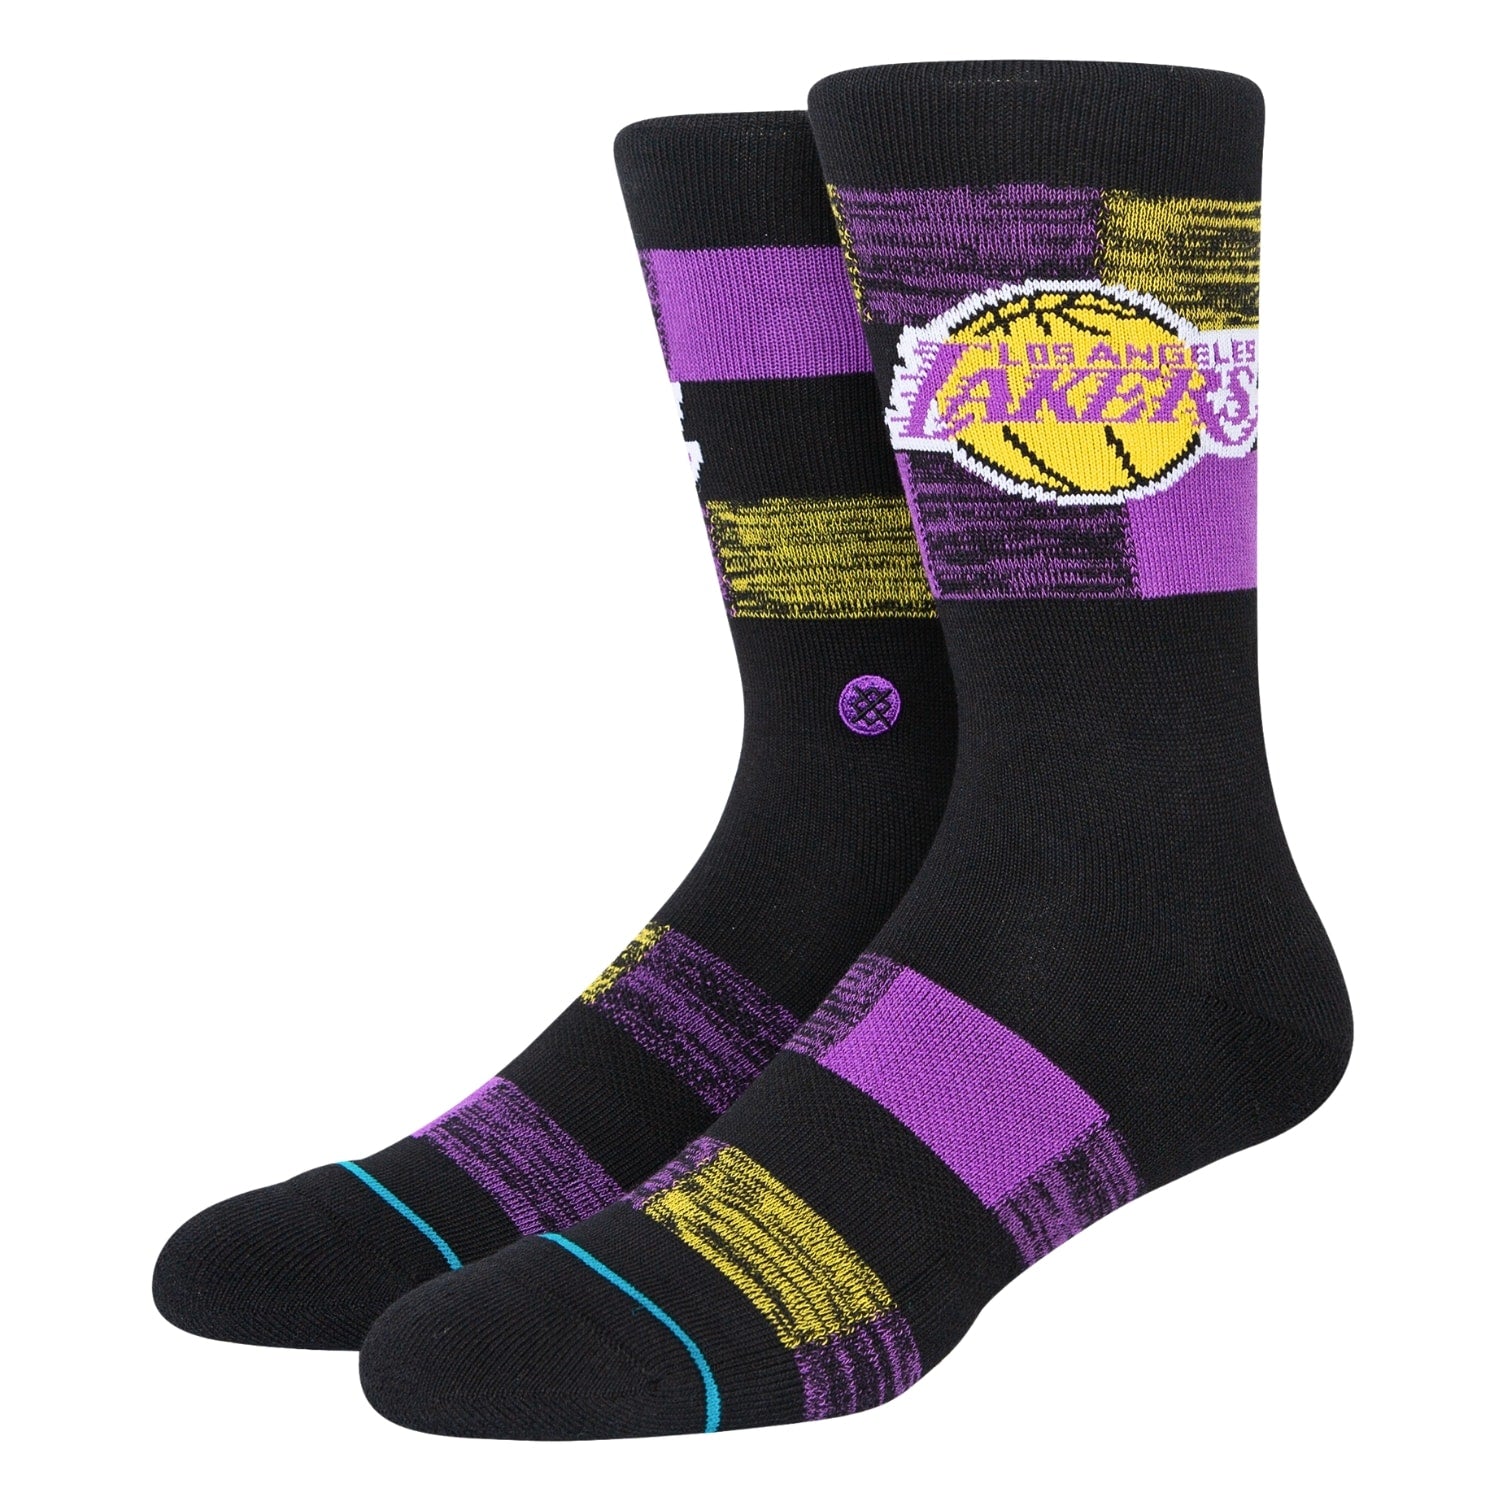 Stance Lakers Cryptic Socks - Black - Mens Crew Length Socks by Stance L (UK8-12.5)